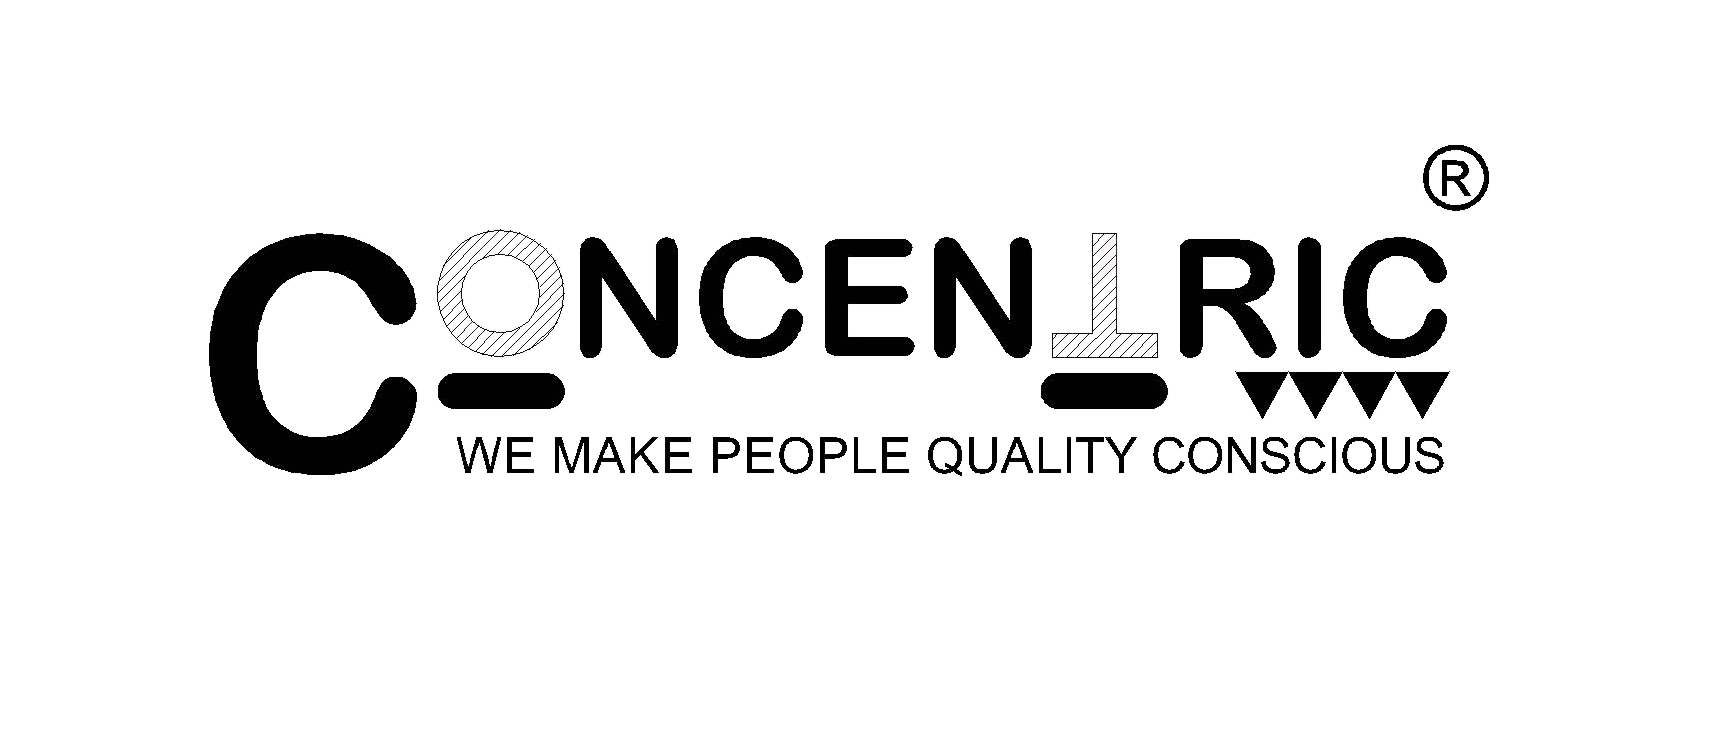 CONCENTRIC ENGINEERING CORPORATION